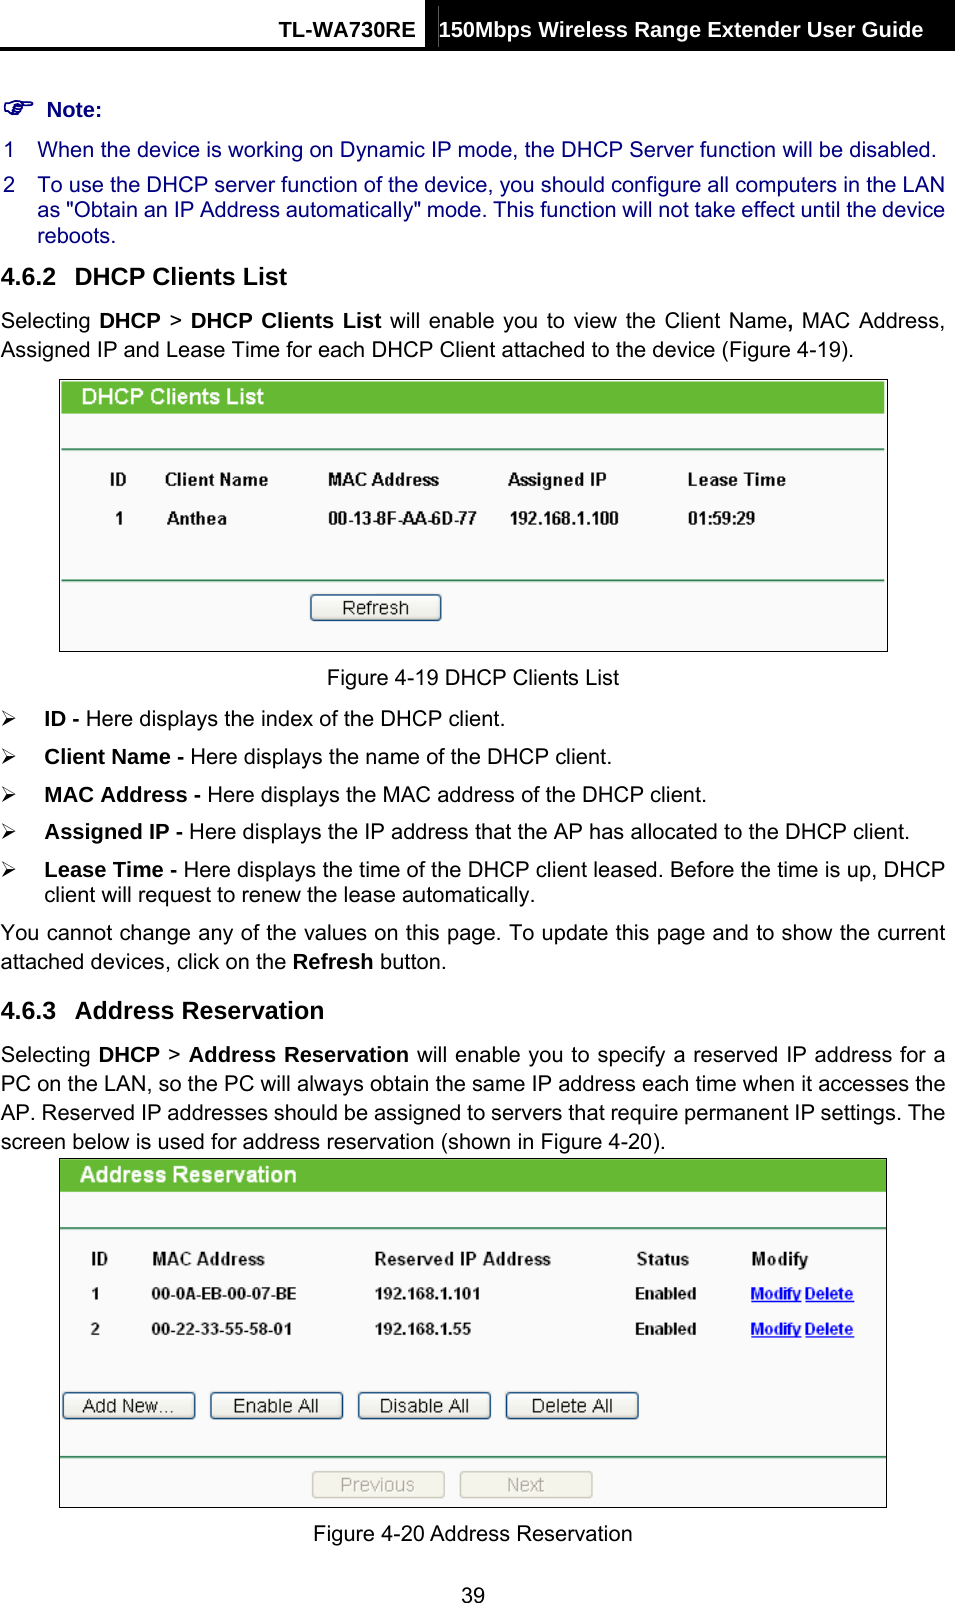 TL-WA730RE 150Mbps Wireless Range Extender User Guide  ) Note: 1  When the device is working on Dynamic IP mode, the DHCP Server function will be disabled.   2  To use the DHCP server function of the device, you should configure all computers in the LAN as &quot;Obtain an IP Address automatically&quot; mode. This function will not take effect until the device reboots.  4.6.2  DHCP Clients List Selecting DHCP &gt; DHCP Clients List will enable you to view the Client Name, MAC Address, Assigned IP and Lease Time for each DHCP Client attached to the device (Figure 4-19).  Figure 4-19 DHCP Clients List ¾ ID - Here displays the index of the DHCP client. ¾ Client Name - Here displays the name of the DHCP client. ¾ MAC Address - Here displays the MAC address of the DHCP client. ¾ Assigned IP - Here displays the IP address that the AP has allocated to the DHCP client. ¾ Lease Time - Here displays the time of the DHCP client leased. Before the time is up, DHCP client will request to renew the lease automatically. You cannot change any of the values on this page. To update this page and to show the current attached devices, click on the Refresh button. 4.6.3  Address Reservation Selecting DHCP &gt; Address Reservation will enable you to specify a reserved IP address for a PC on the LAN, so the PC will always obtain the same IP address each time when it accesses the AP. Reserved IP addresses should be assigned to servers that require permanent IP settings. The screen below is used for address reservation (shown in Figure 4-20).  Figure 4-20 Address Reservation 39 